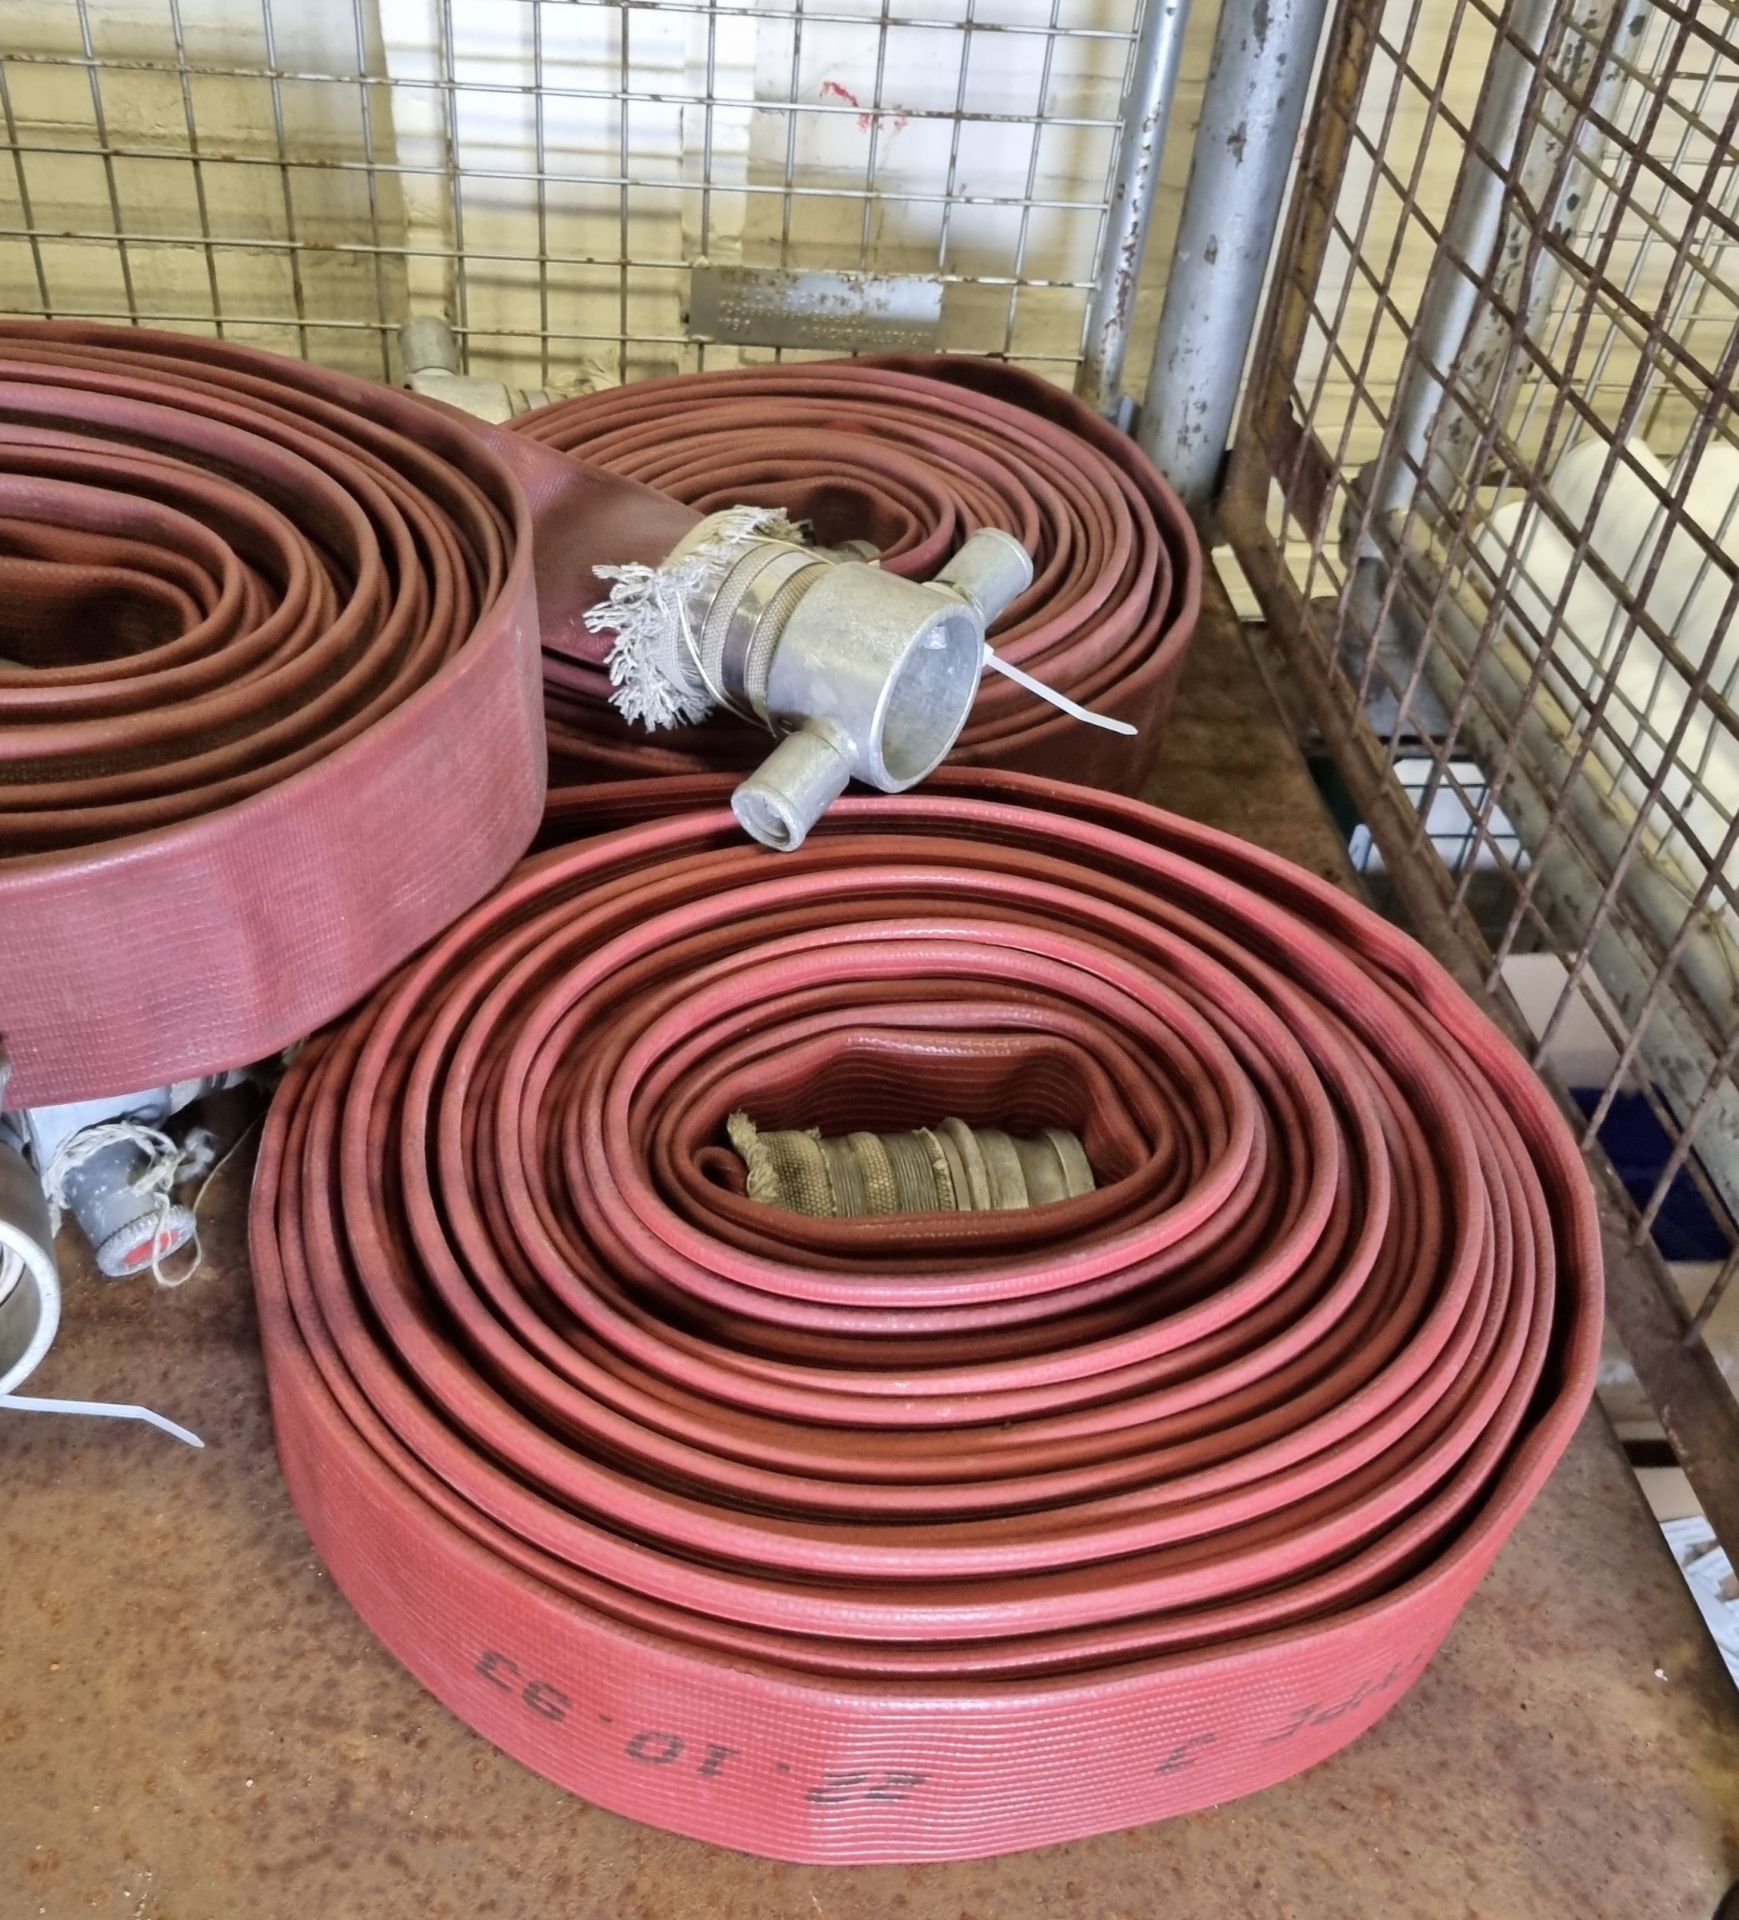 5x Red layflat fire hose - 70mm diameter, approx 20m length - Image 3 of 4